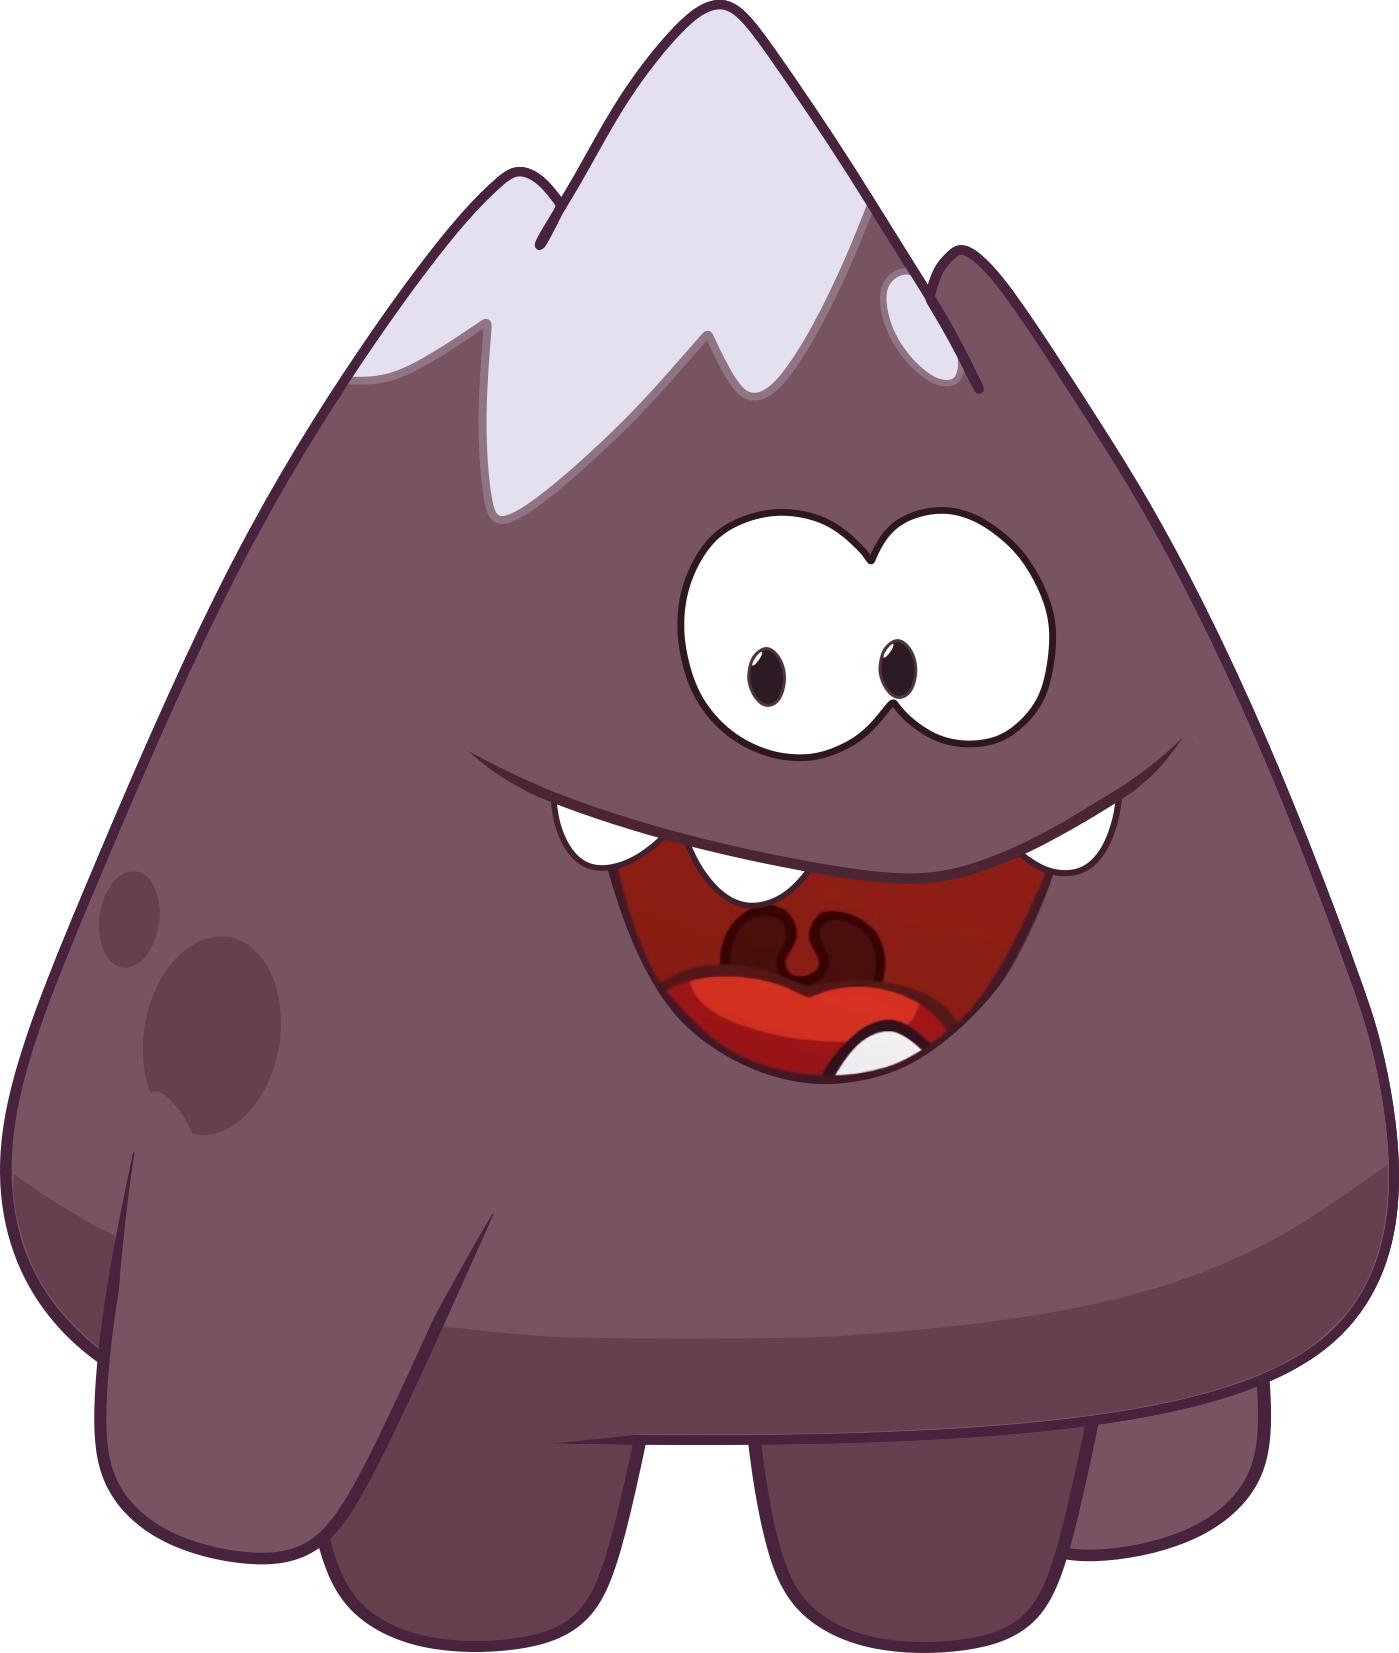 https://static.wikia.nocookie.net/omnomstories/images/6/68/Volcano_Nom_%28Stock_Image%29.png/revision/latest?cb=20211208010817